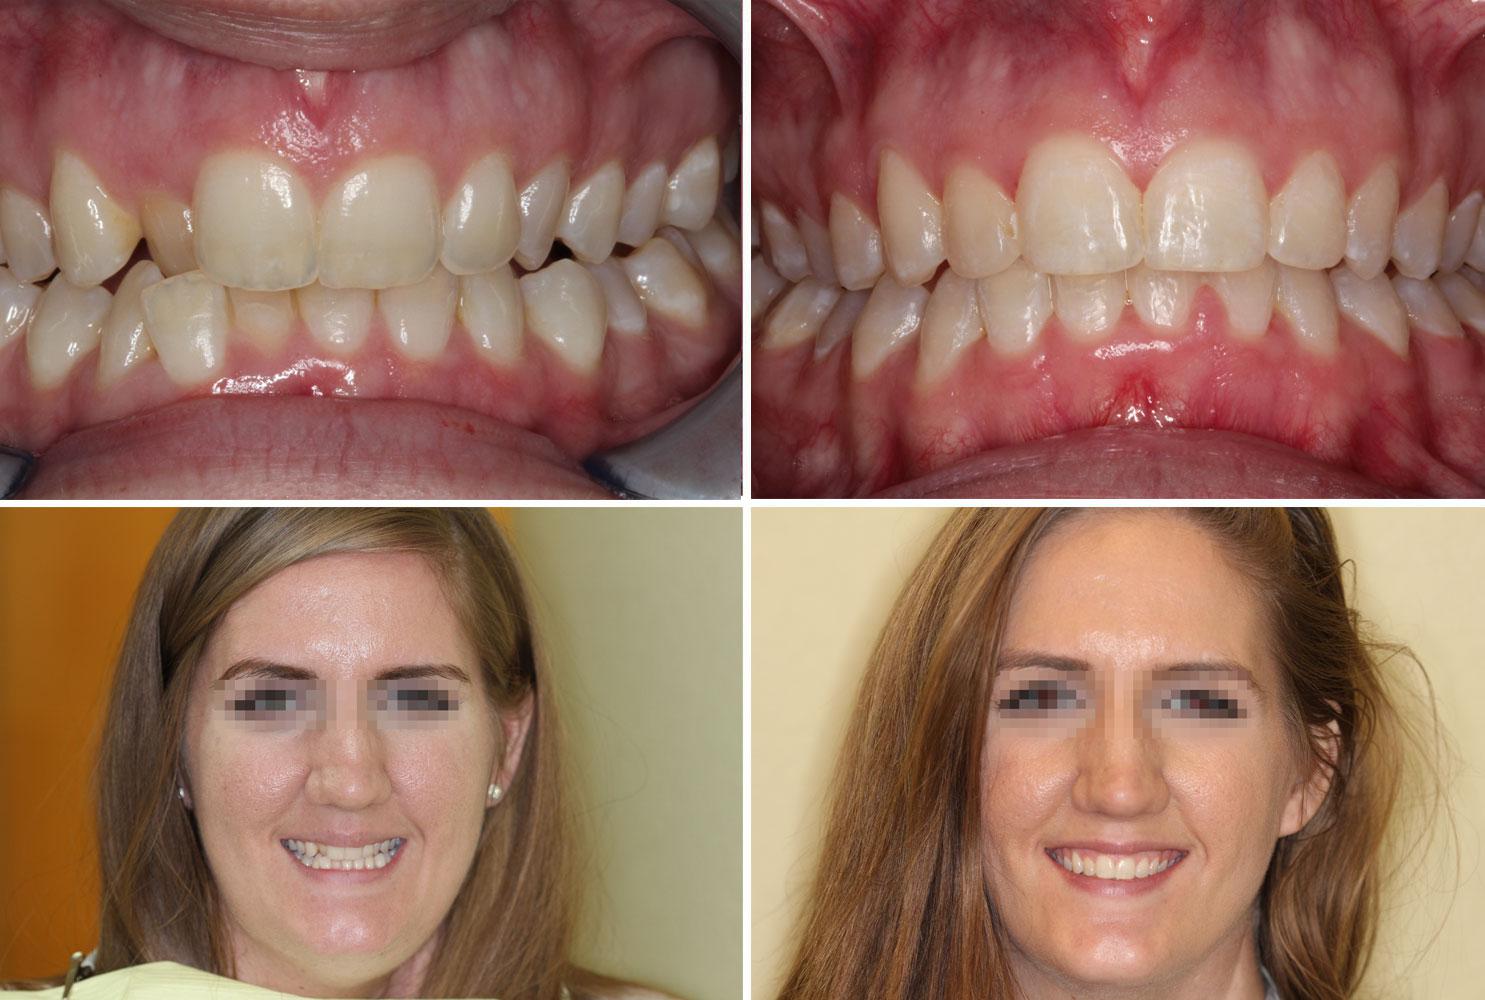 Orthodontics improved this young woman's smile